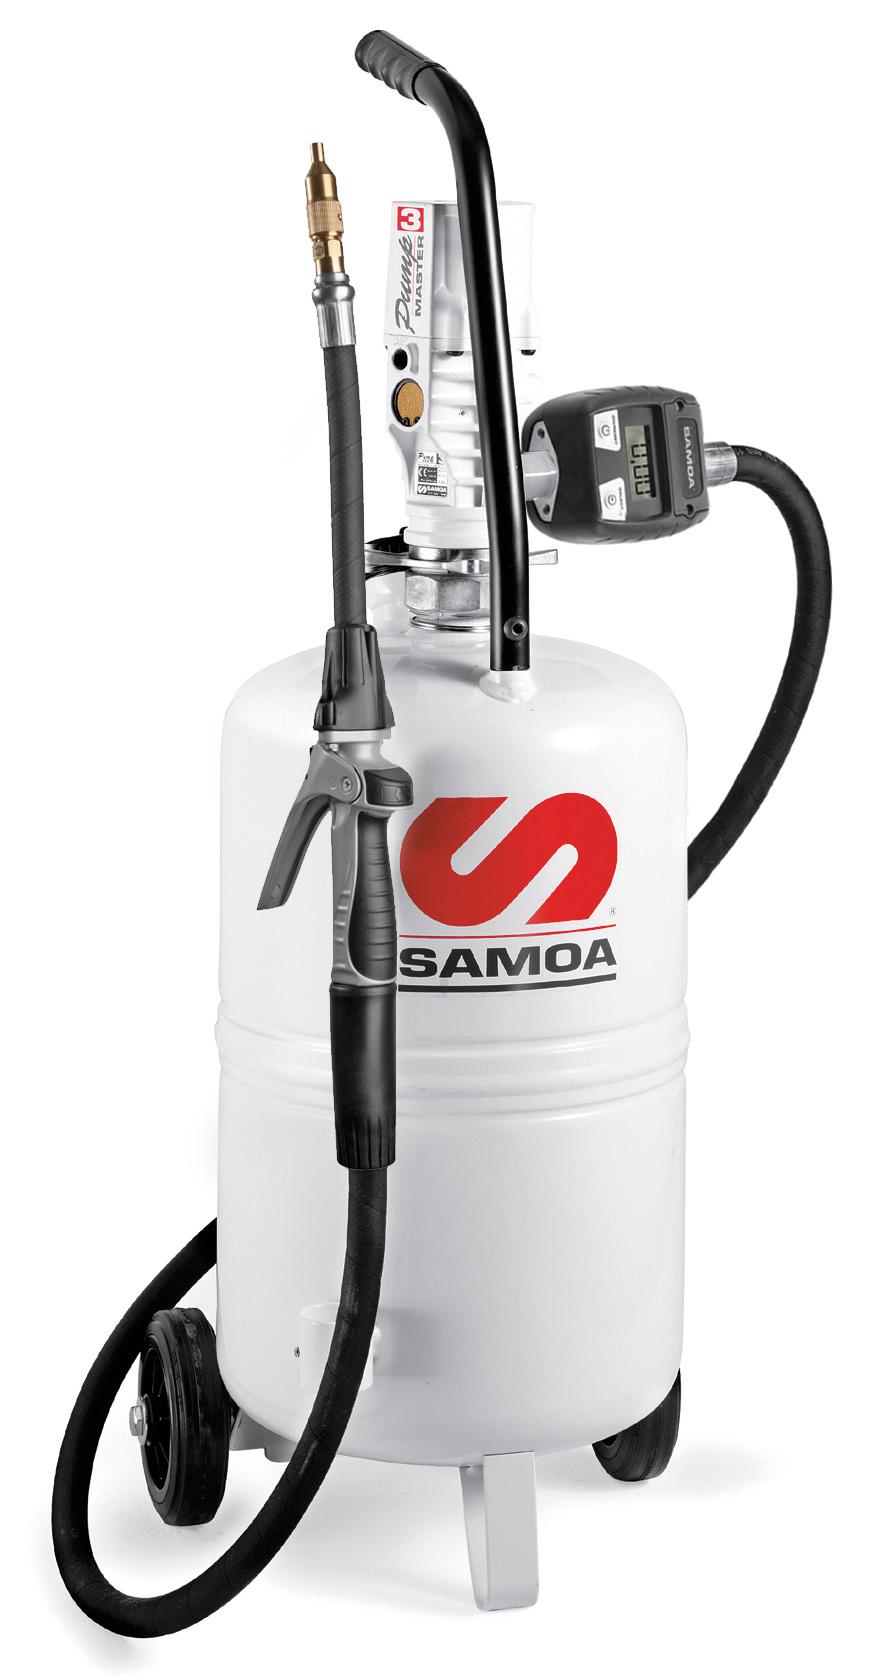 PUMPMASTER 3 - 2:1 RATIO OIL PNEUMATIC PUMP, 25 L SELF CONTAINER MOBILE PACKAGE